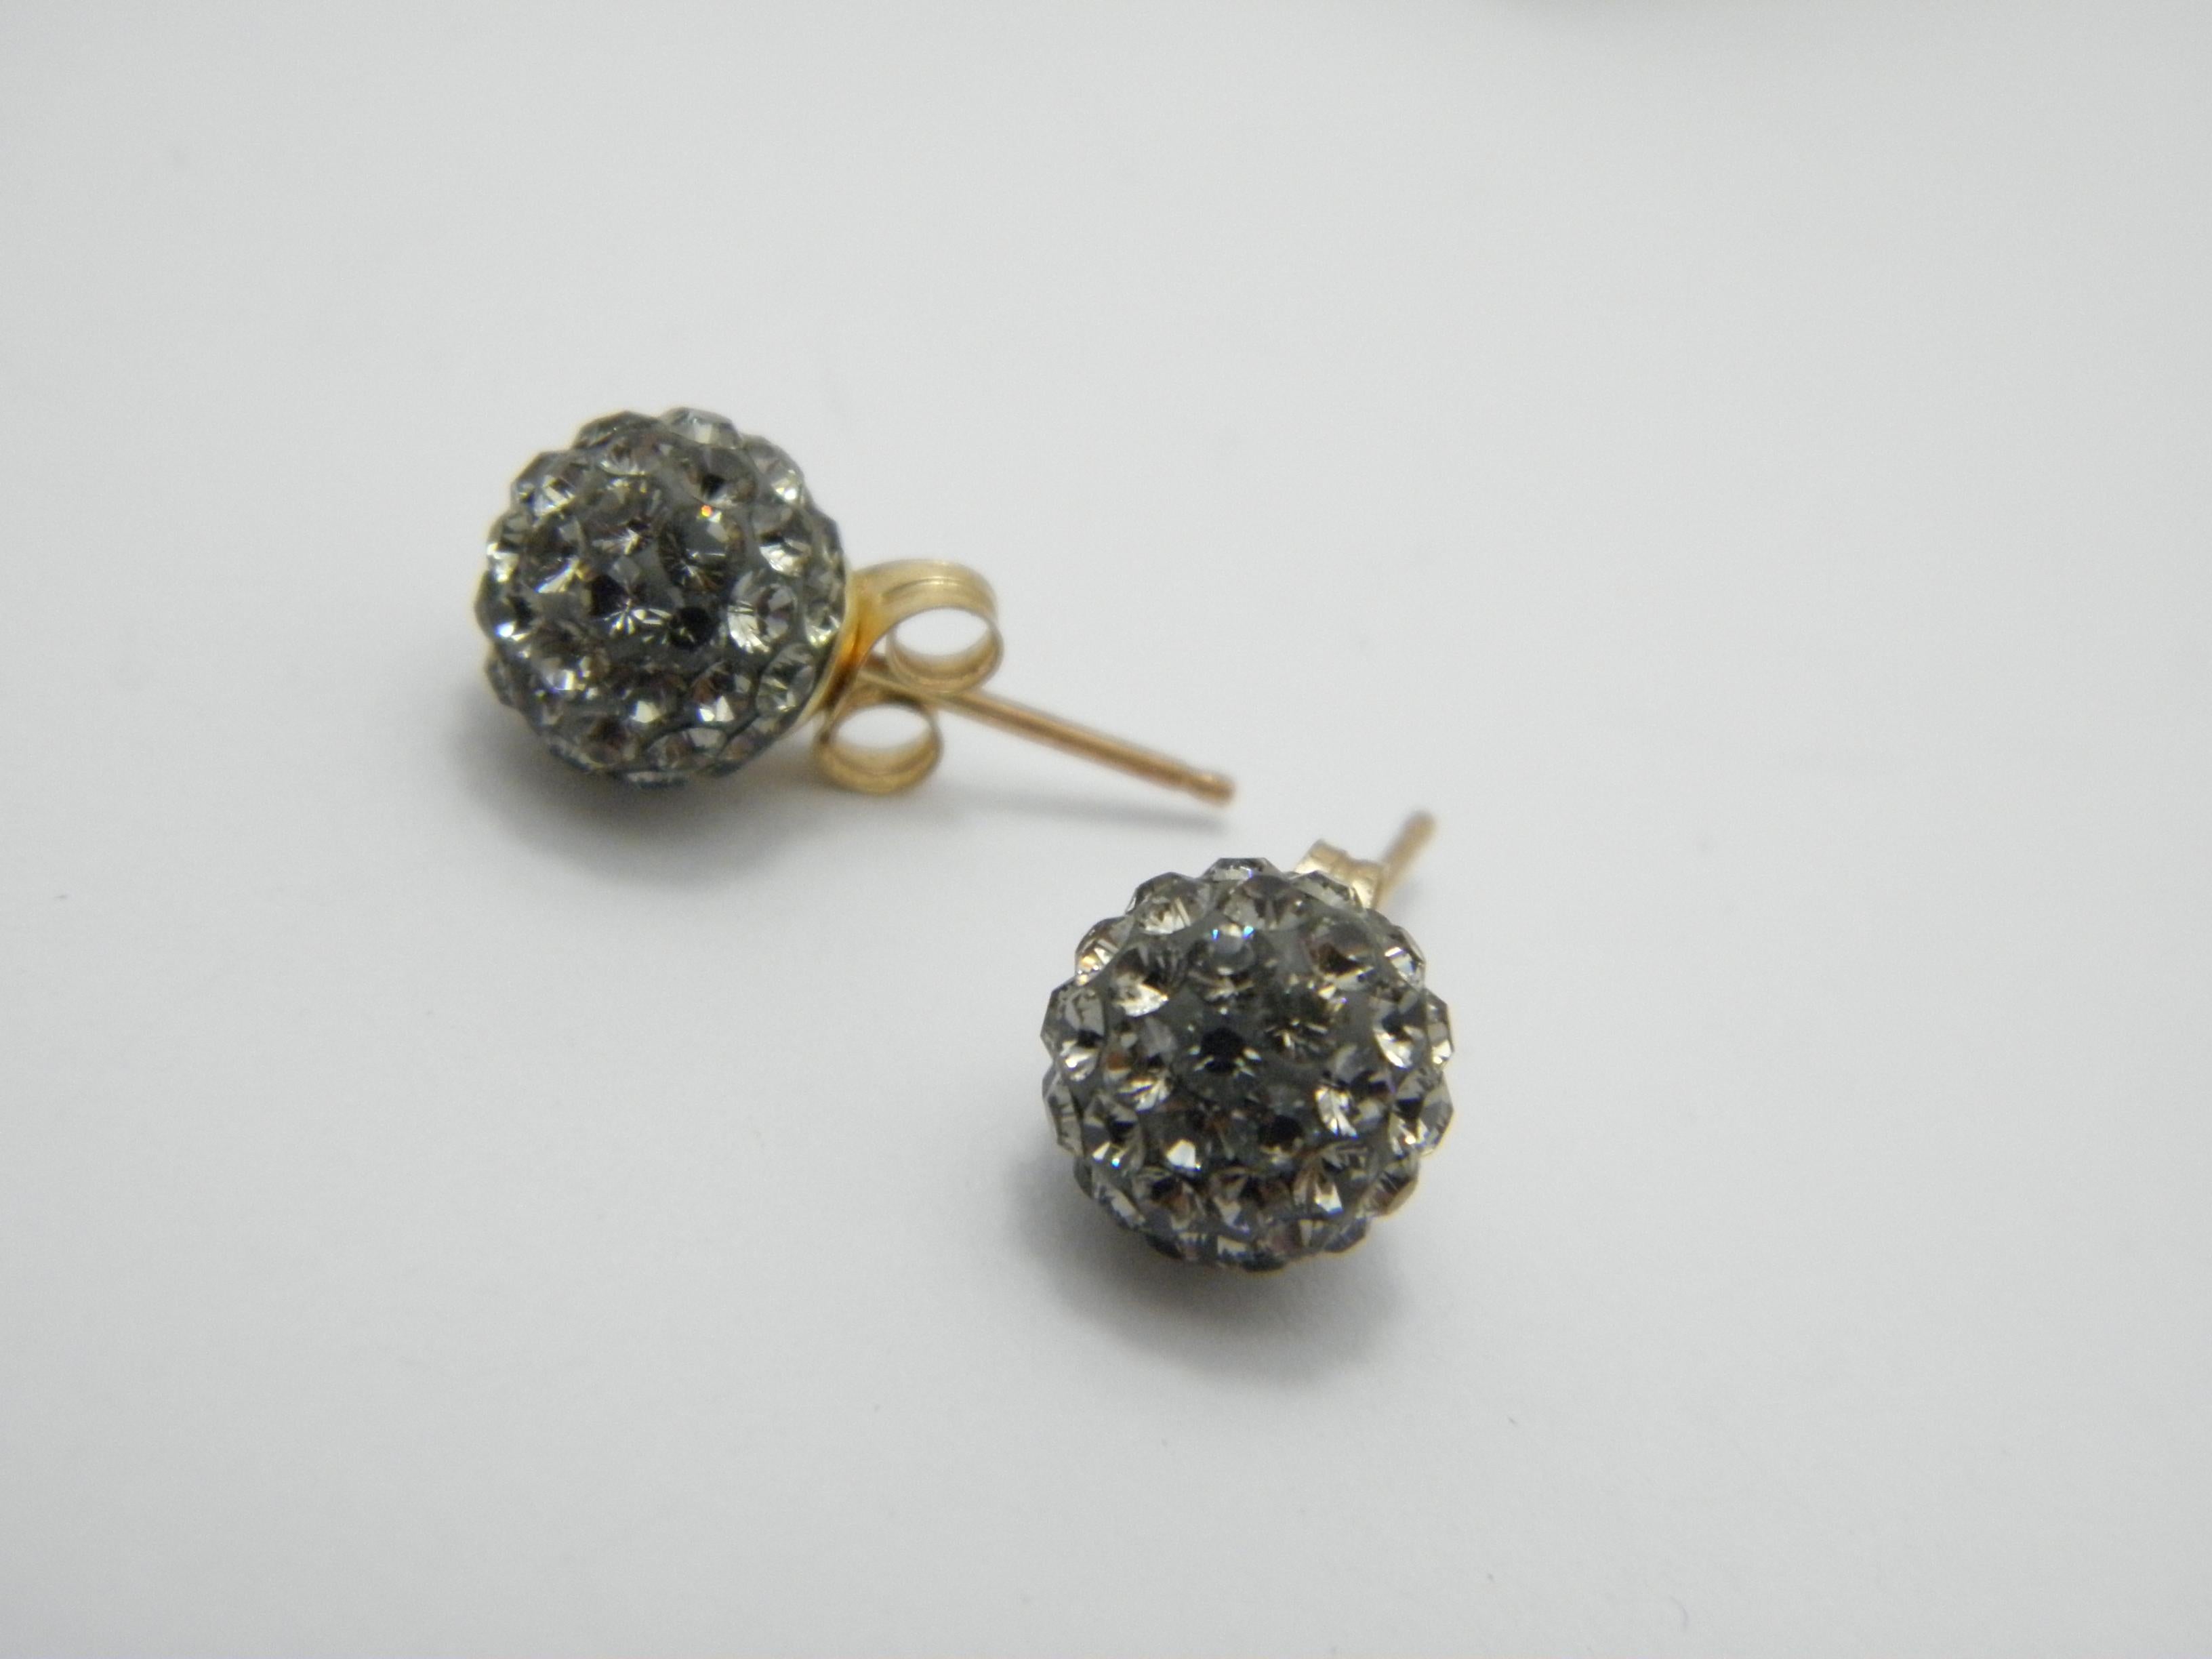 Round Cut Vintage 9ct Gold Large Glitter Ball Crystal Stud Earrings 375 Purity VGC For Sale